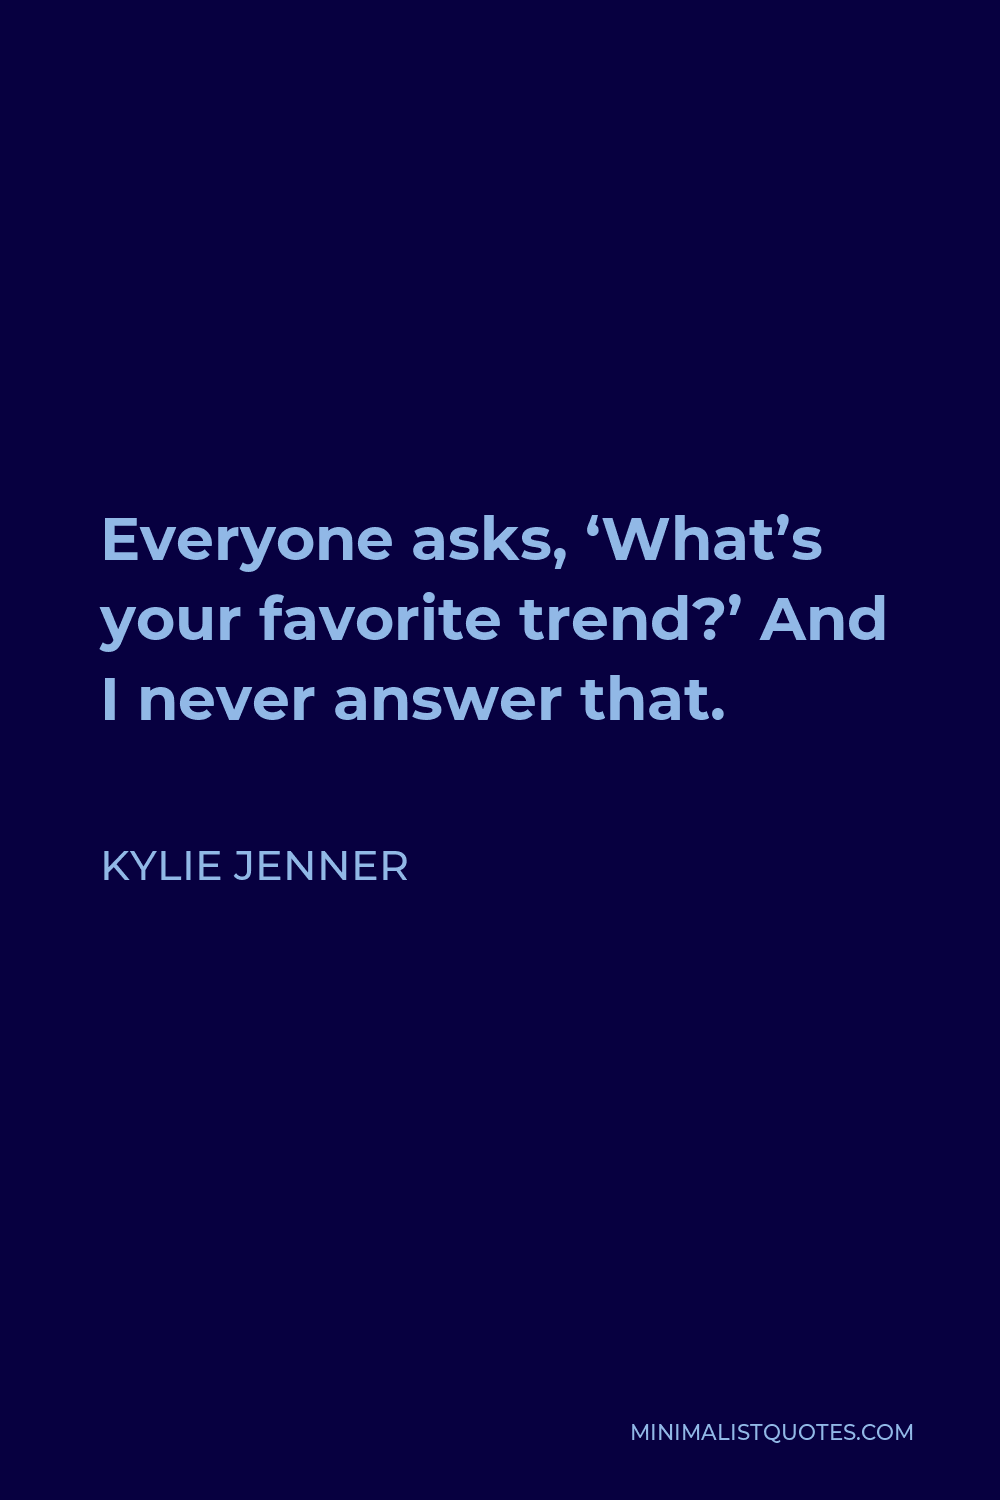 Kylie Jenner Quote - Everyone asks, ‘What’s your favorite trend?’ And I never answer that.